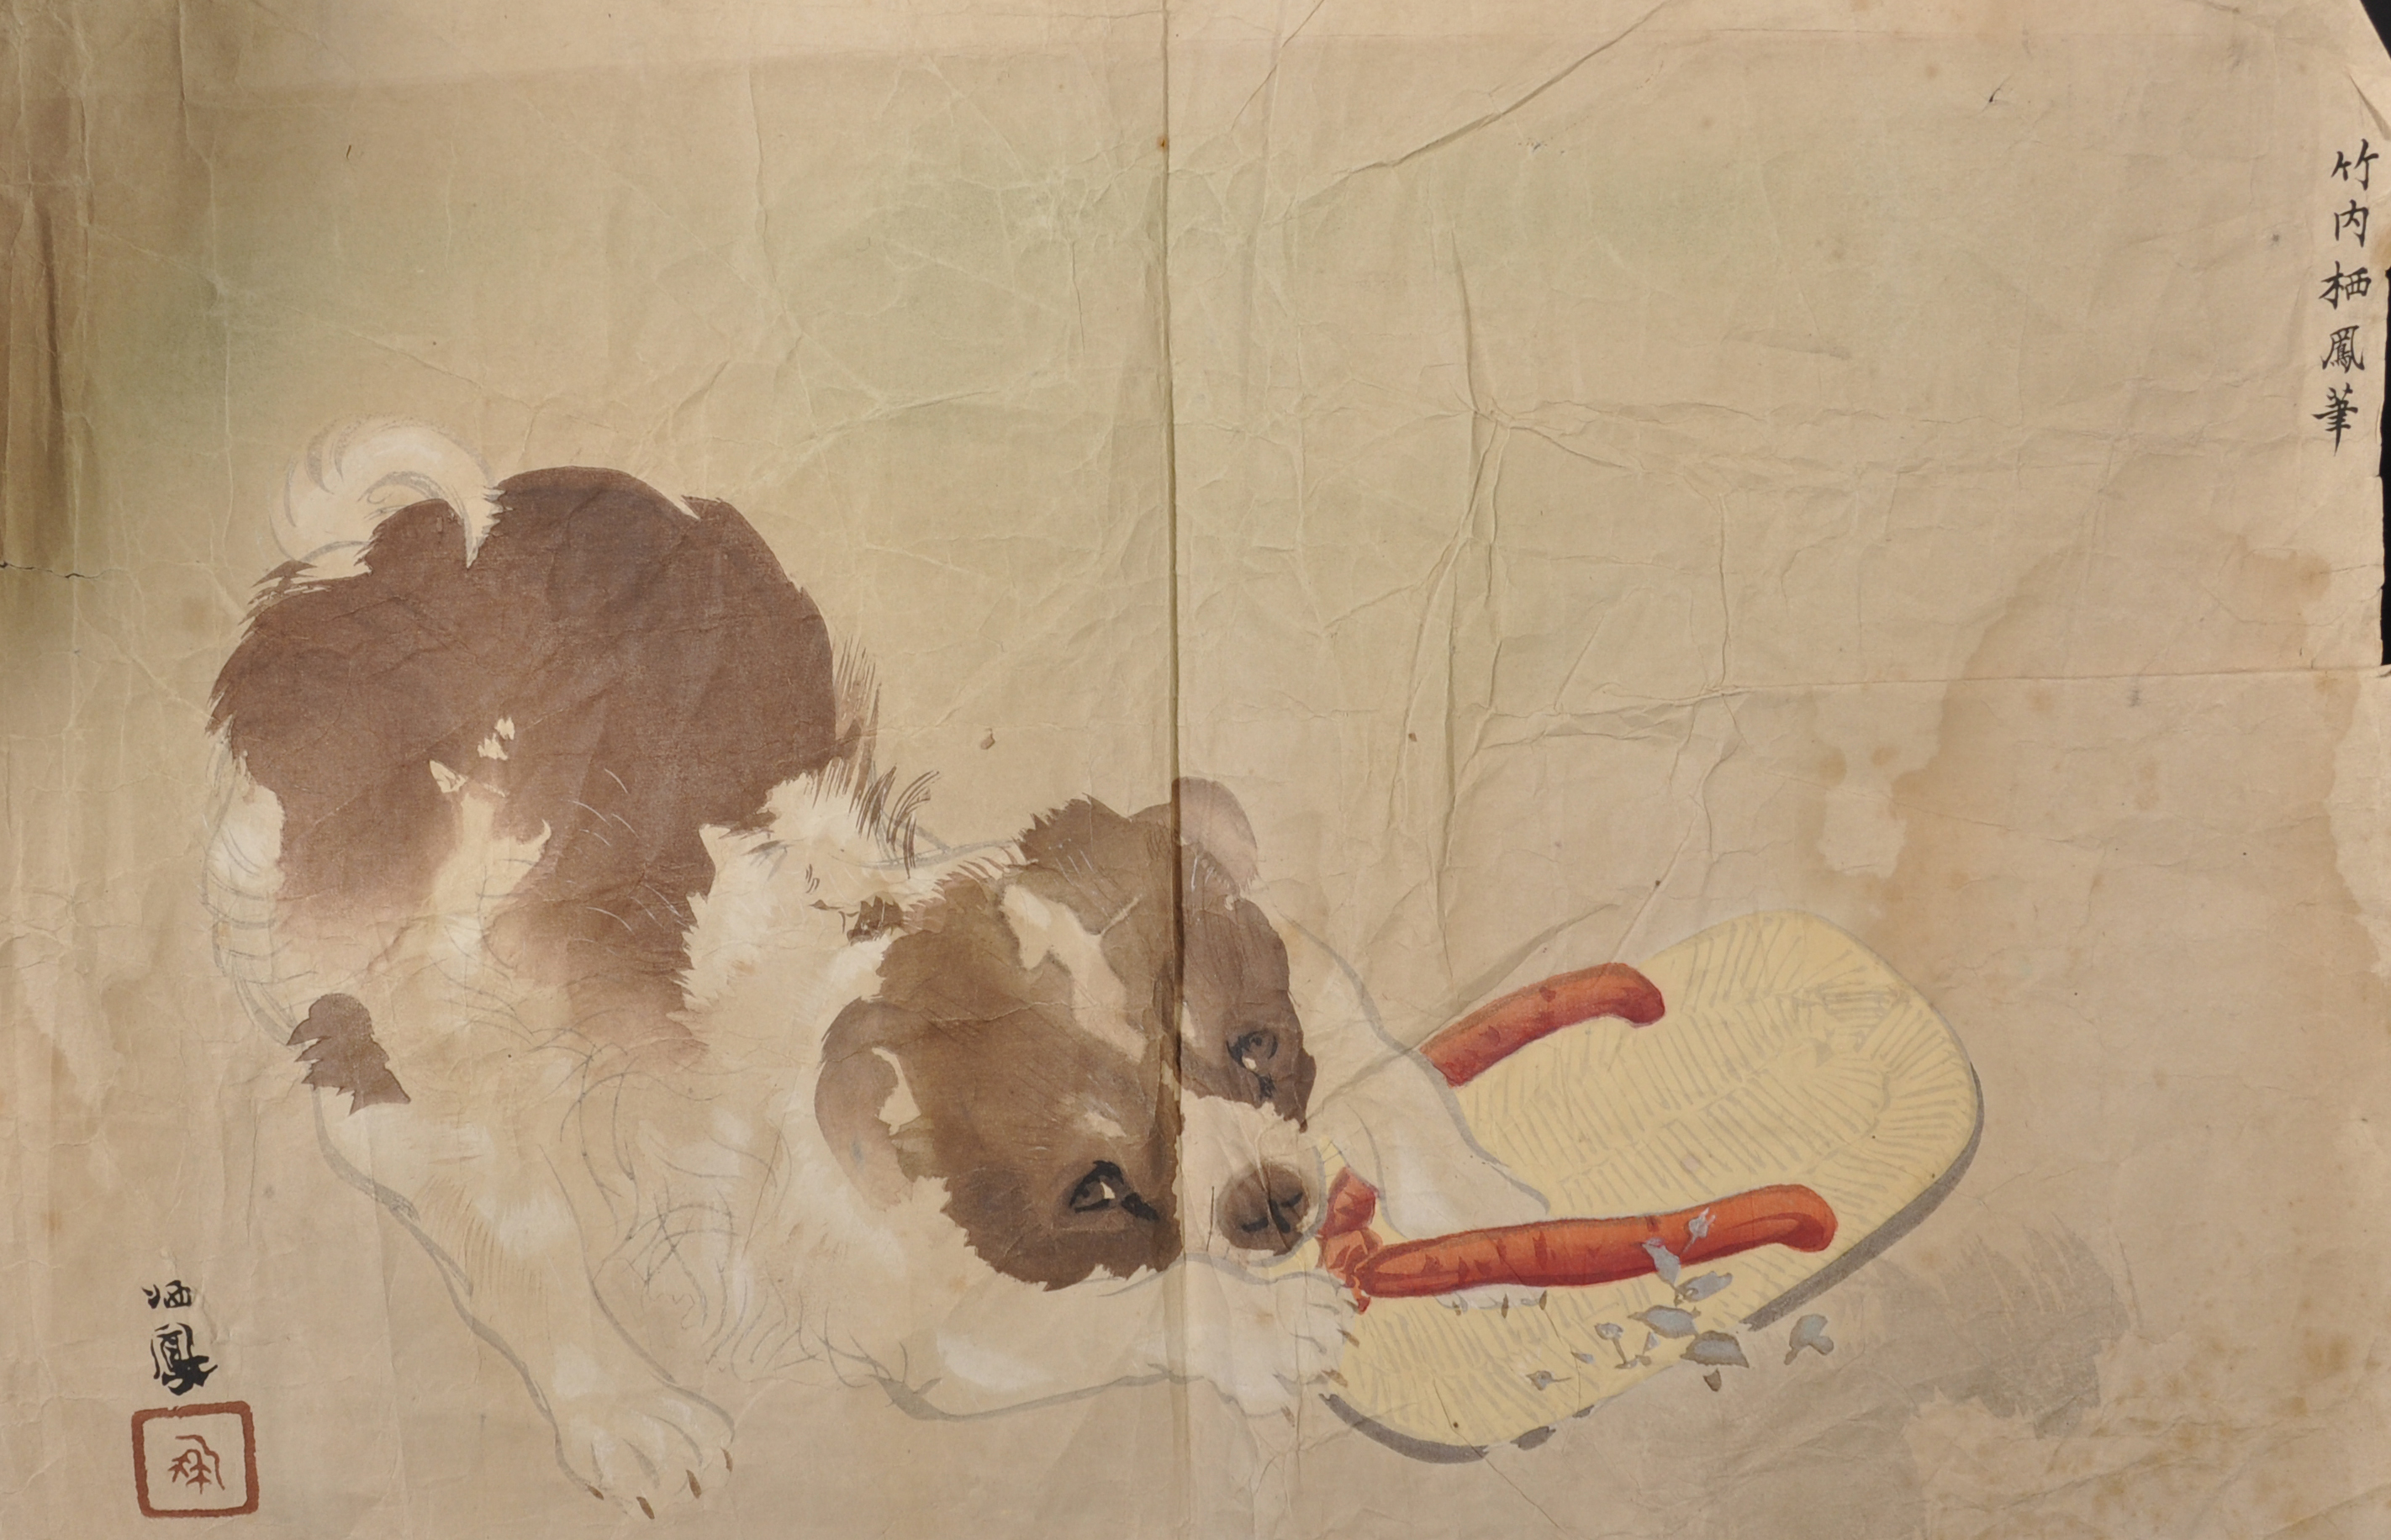 Seiho Takeuchi (1864-1942) Japanese. A Puppy Playing with a Sandal, Woodblock Print, 20" x 14.25".